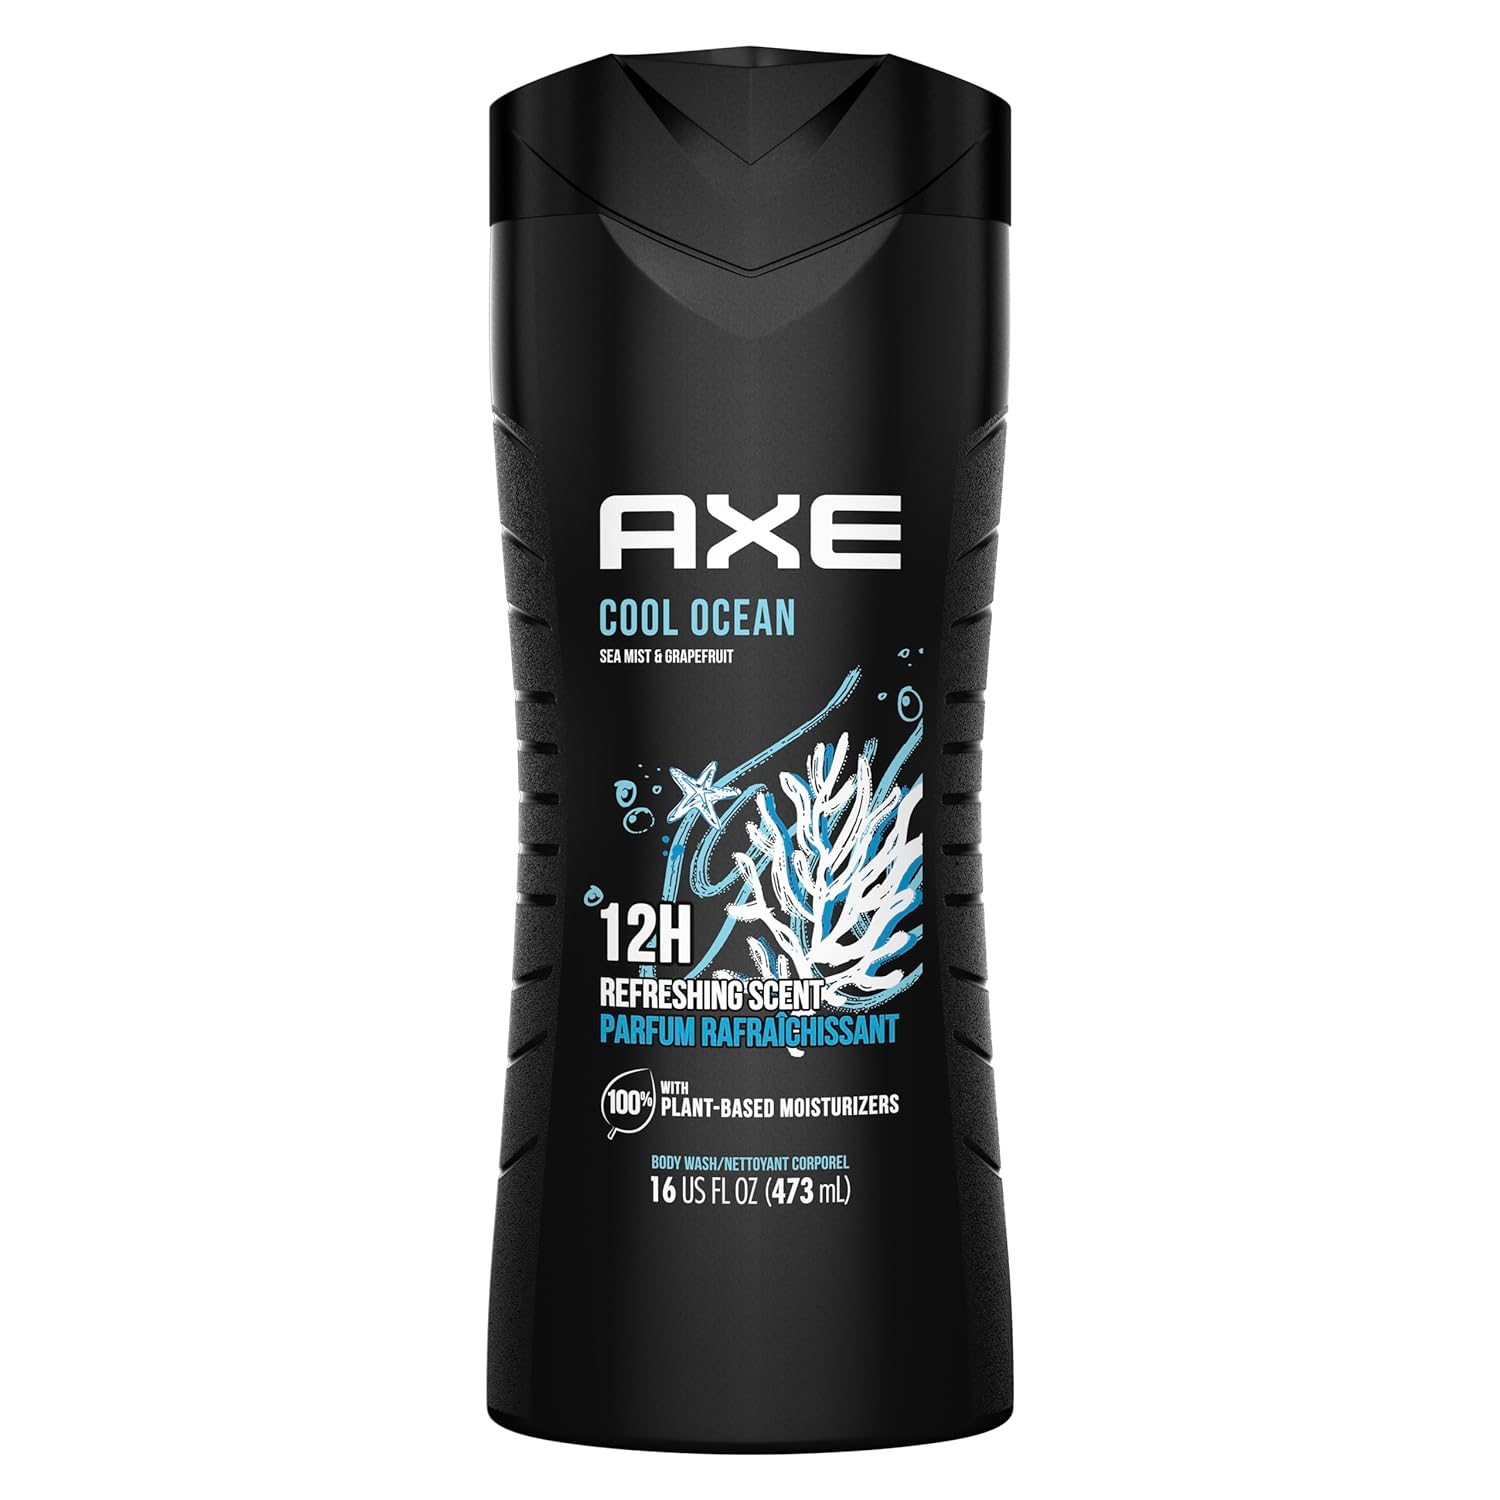 AXE Cool Ocean Men' Body Wash With Essential Oils 12H Refreshing Scent Body Wash For Men, Clean and Fresh Scent 16 oz